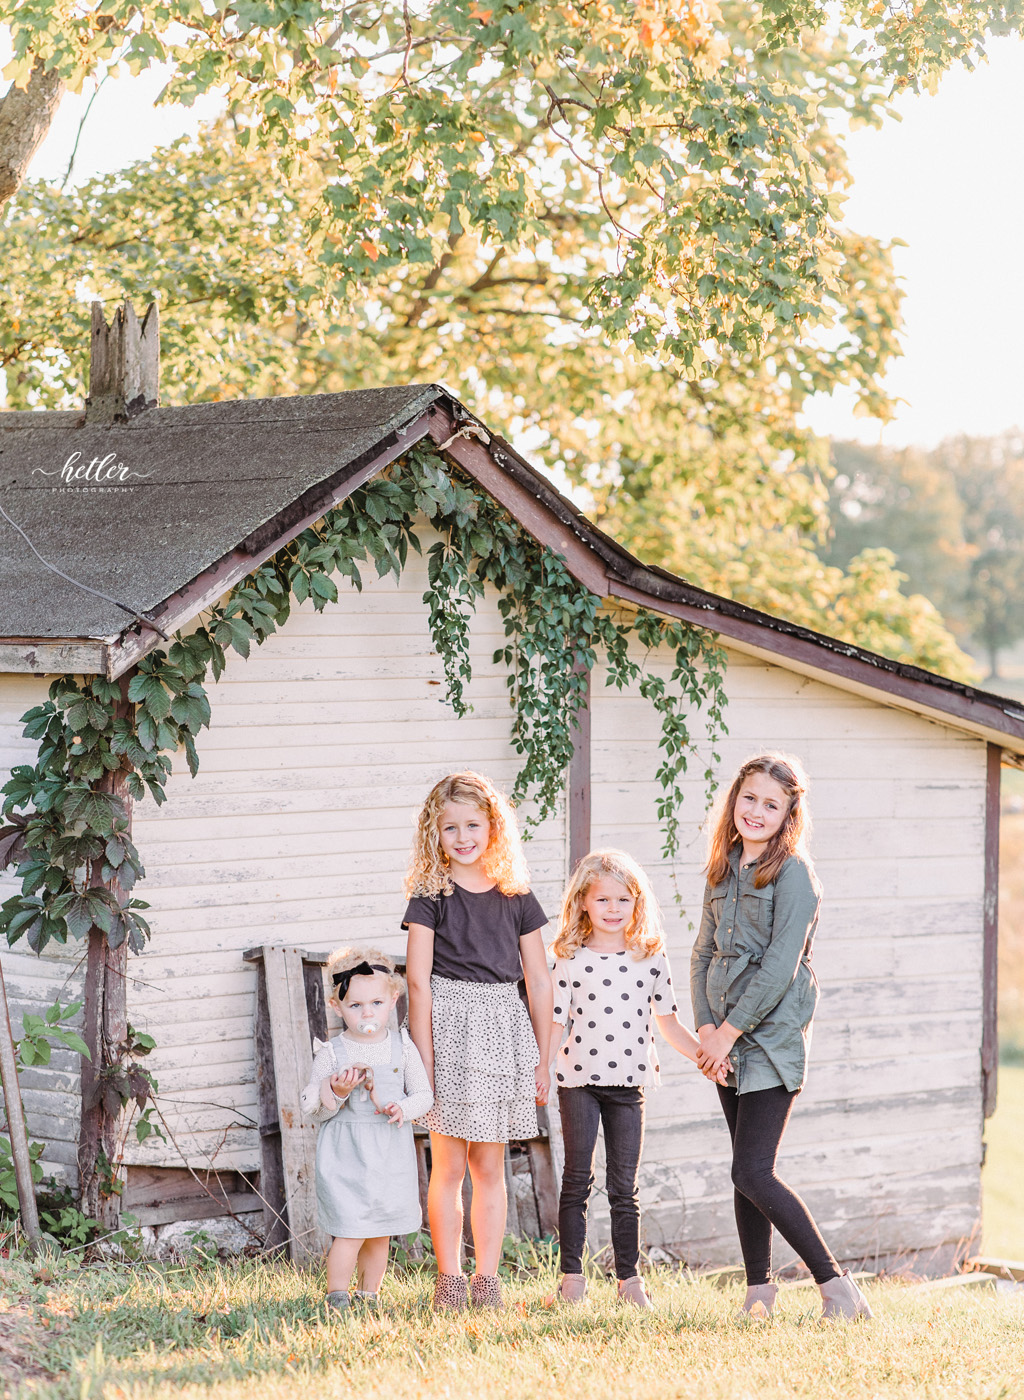 Fall family photo session in Grand Rapids Michigan at golden hour